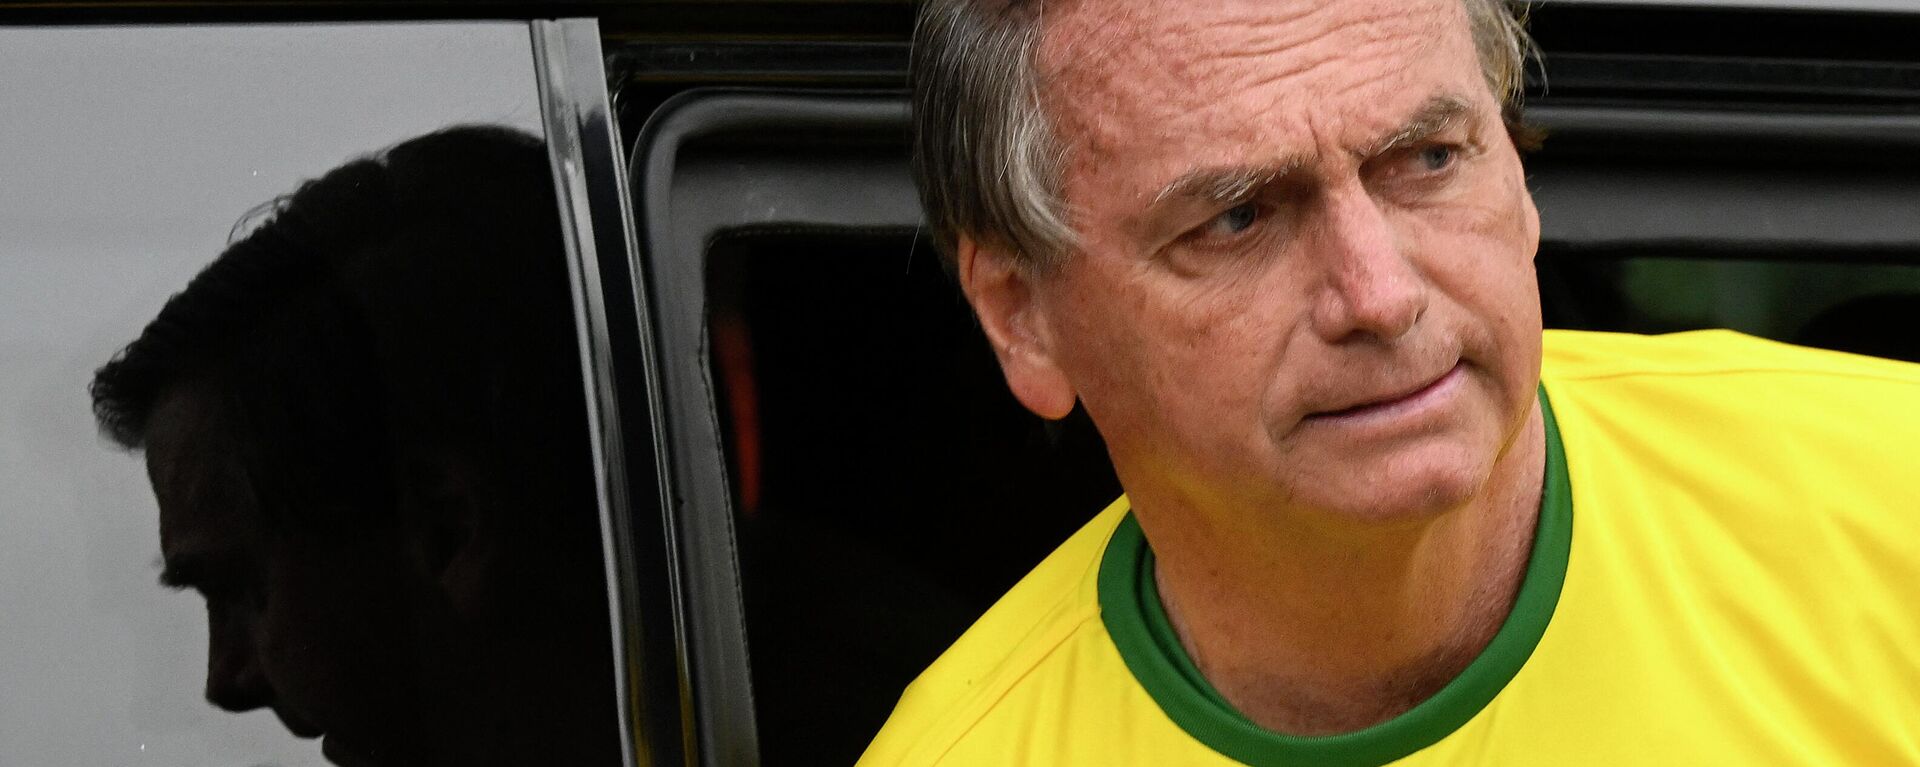 Brazilian president and re-election candidate Jair Bolsonaro arrives at a polling station to vote during the legislative and presidential election, in Rio de Janeiro, Brazil - Sputnik International, 1920, 03.10.2022